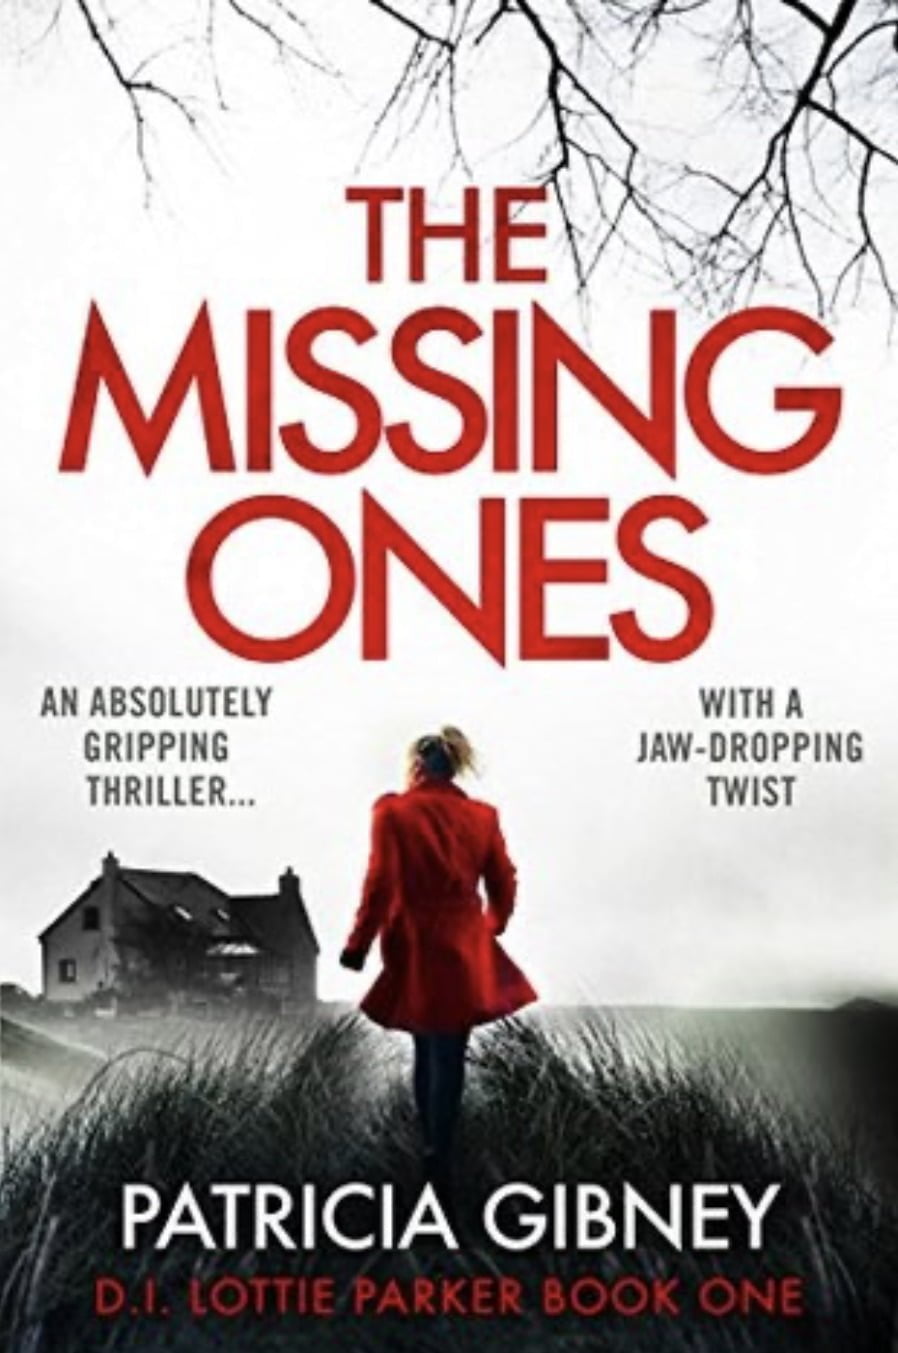 THE MISSING ONES BY PATRICIA GIBNEY – BOOK REVIEW